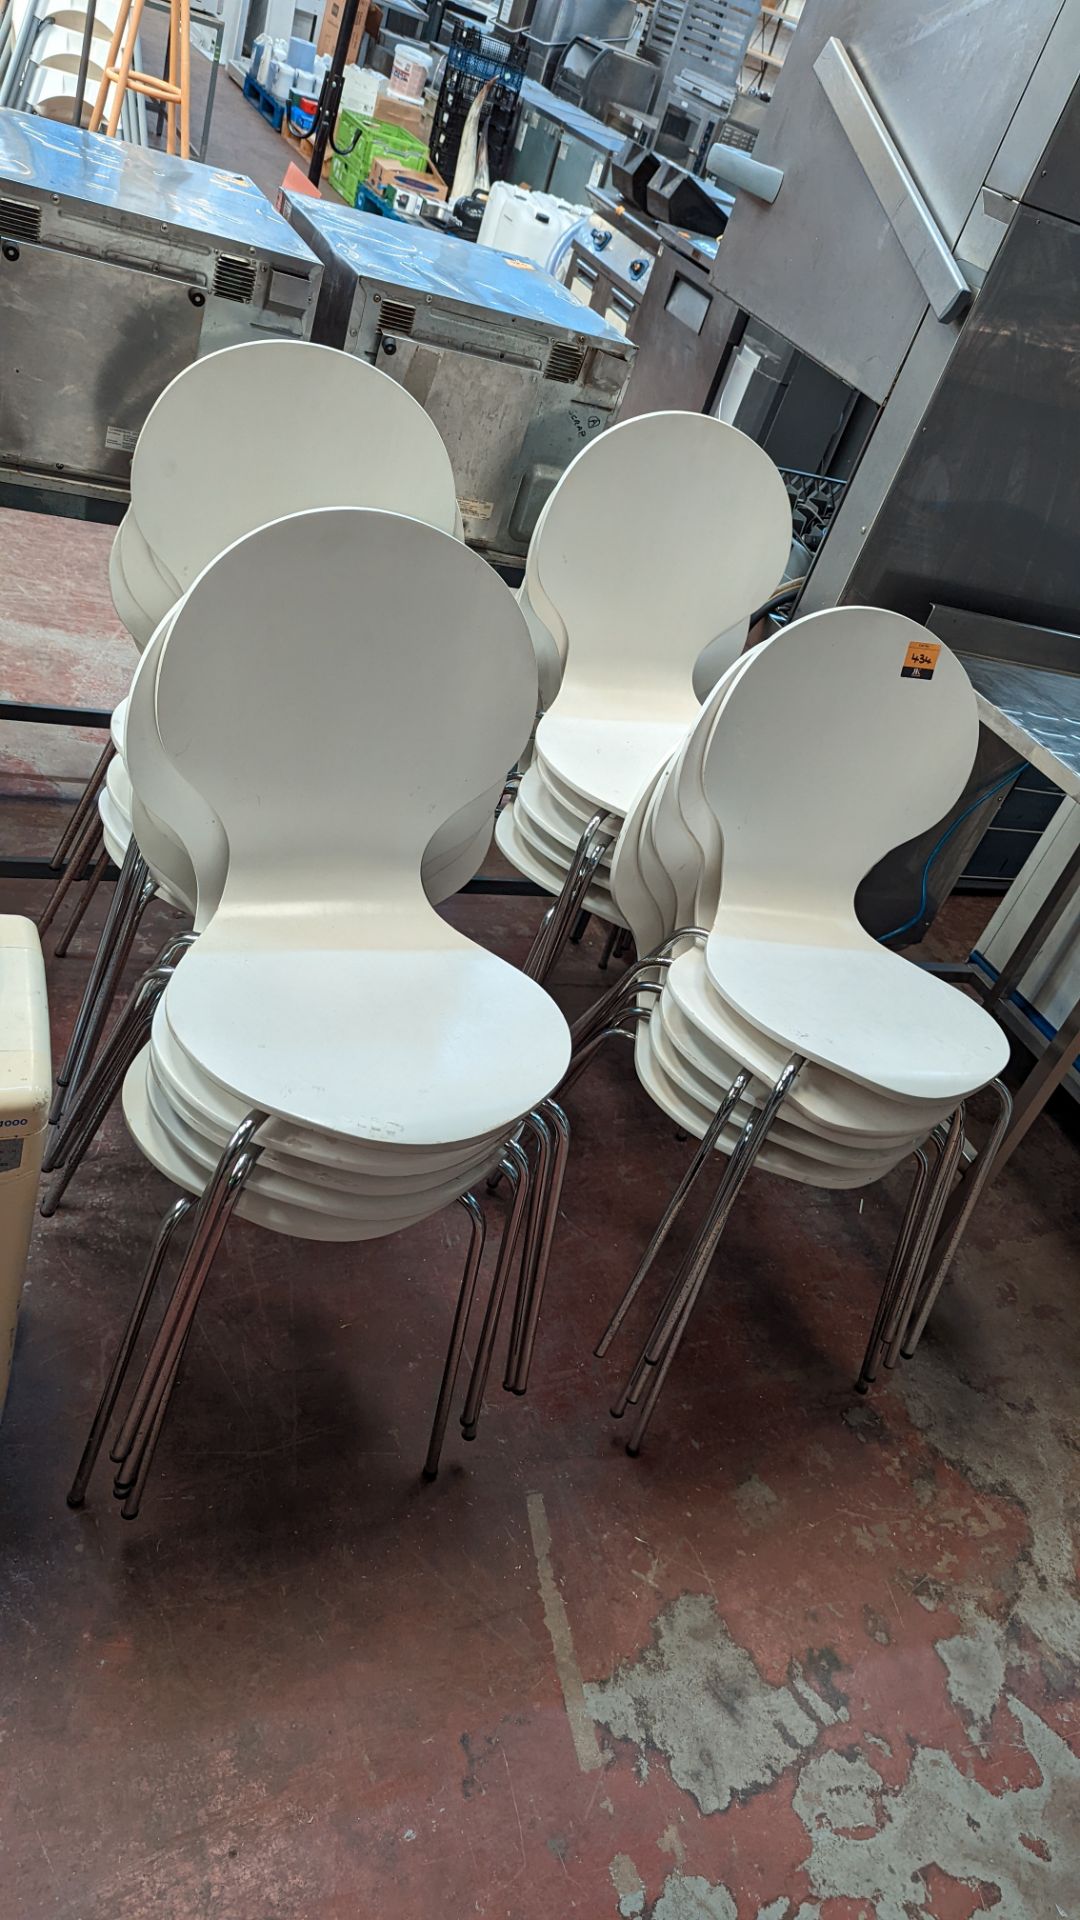 20 matching stacking chairs in white painted wood on chrome bases - Image 6 of 6